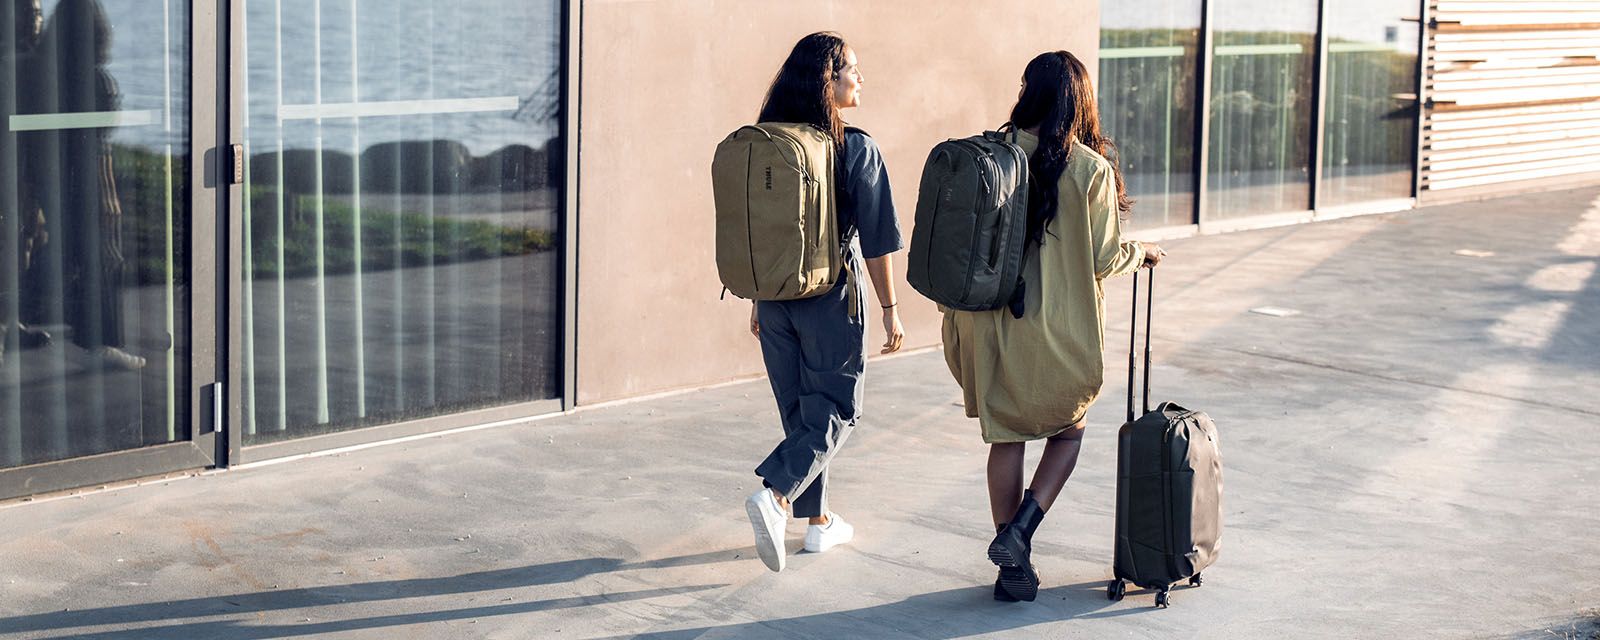 Two women walk down a sunny sidewalk with Thule Aion backpacks and carry on suitcase.